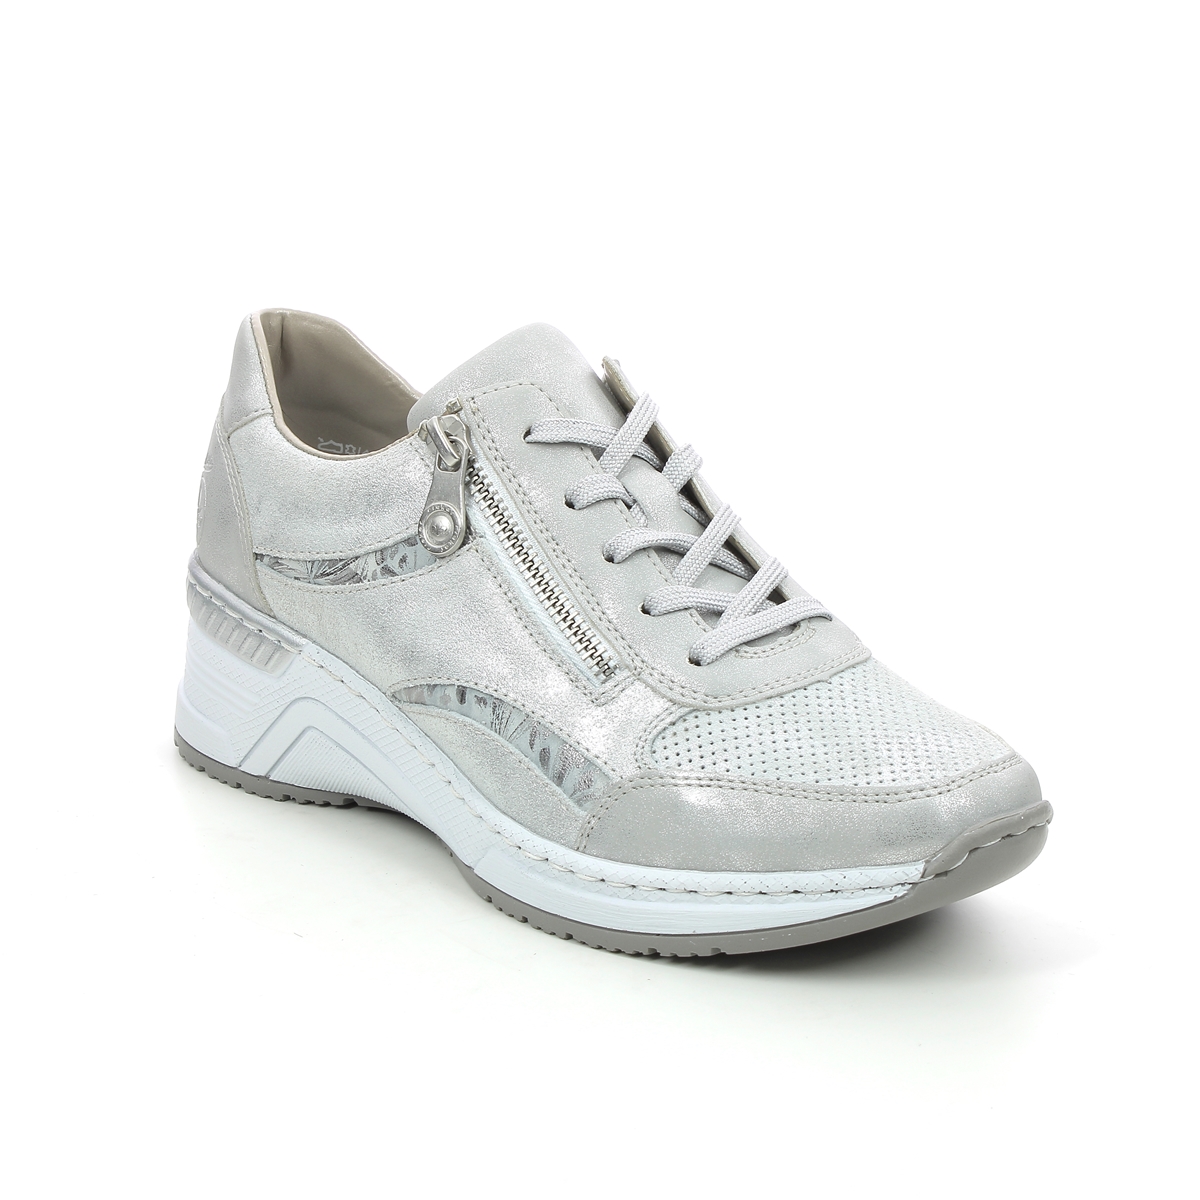 Rieker N4306-40 Silver Womens lacing shoes in a Plain Man-made in Size 39